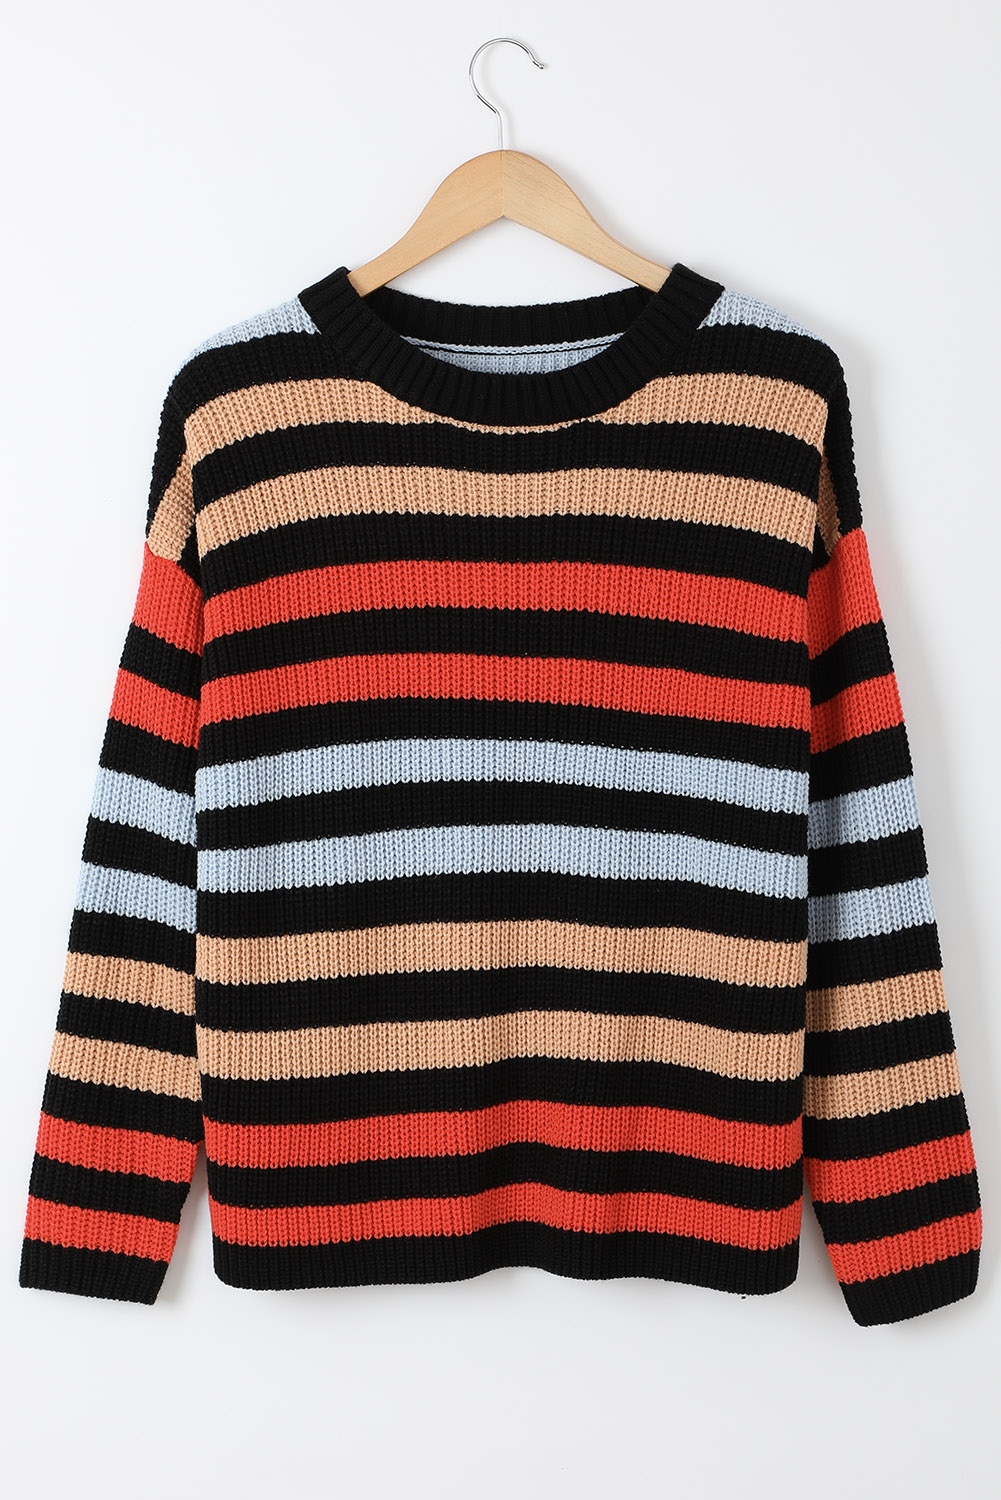 Ladies striped casual sweateres (9)